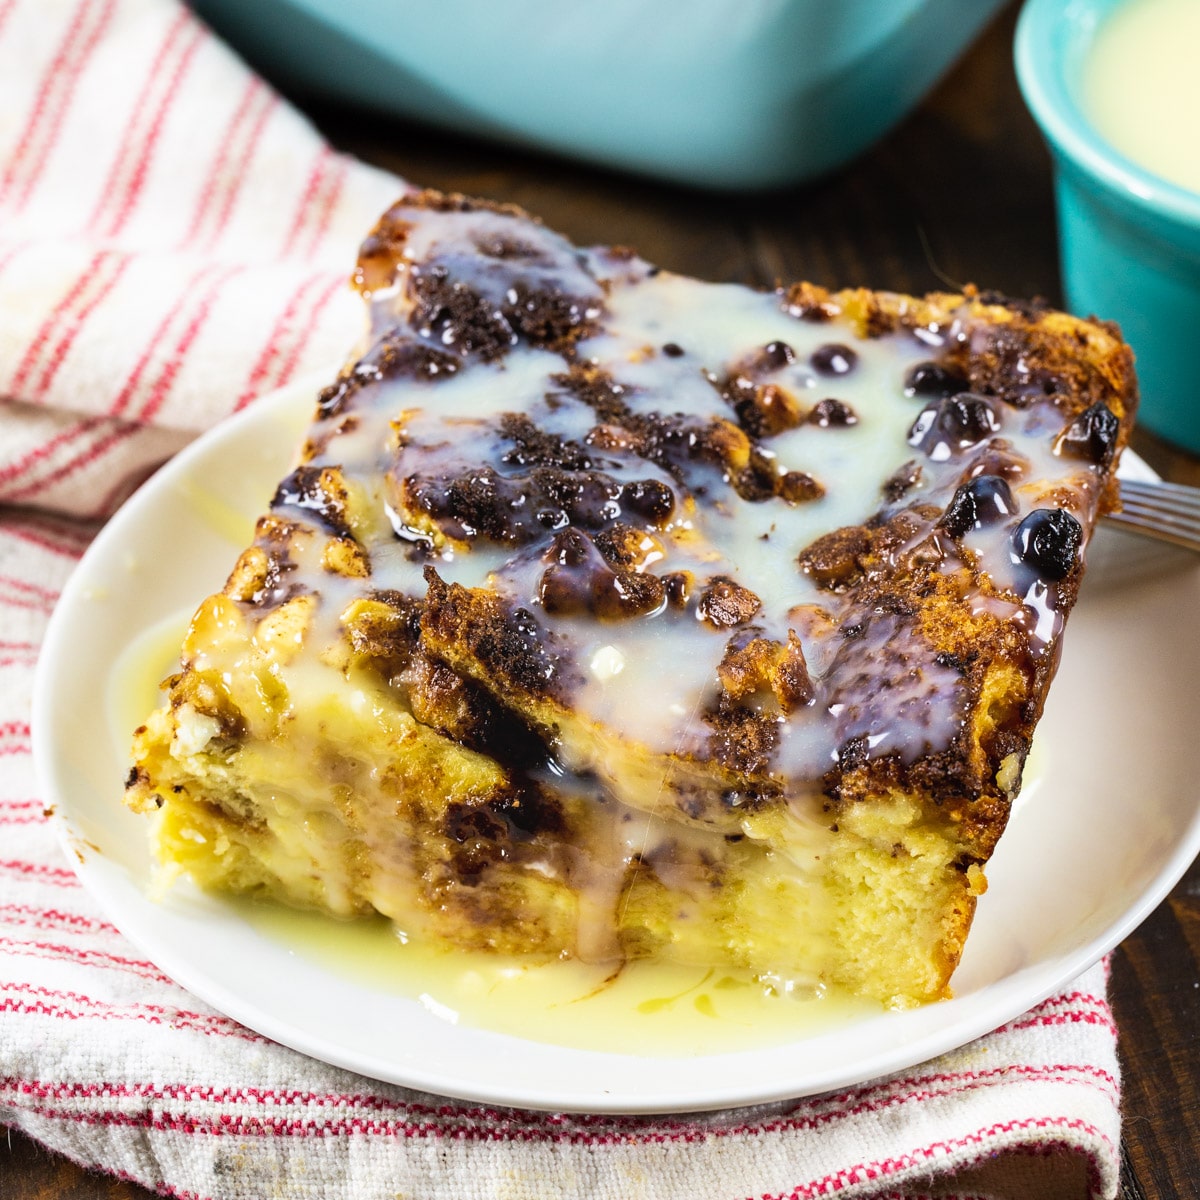 Slice of White Chocolate Bread Pudding on a plate.